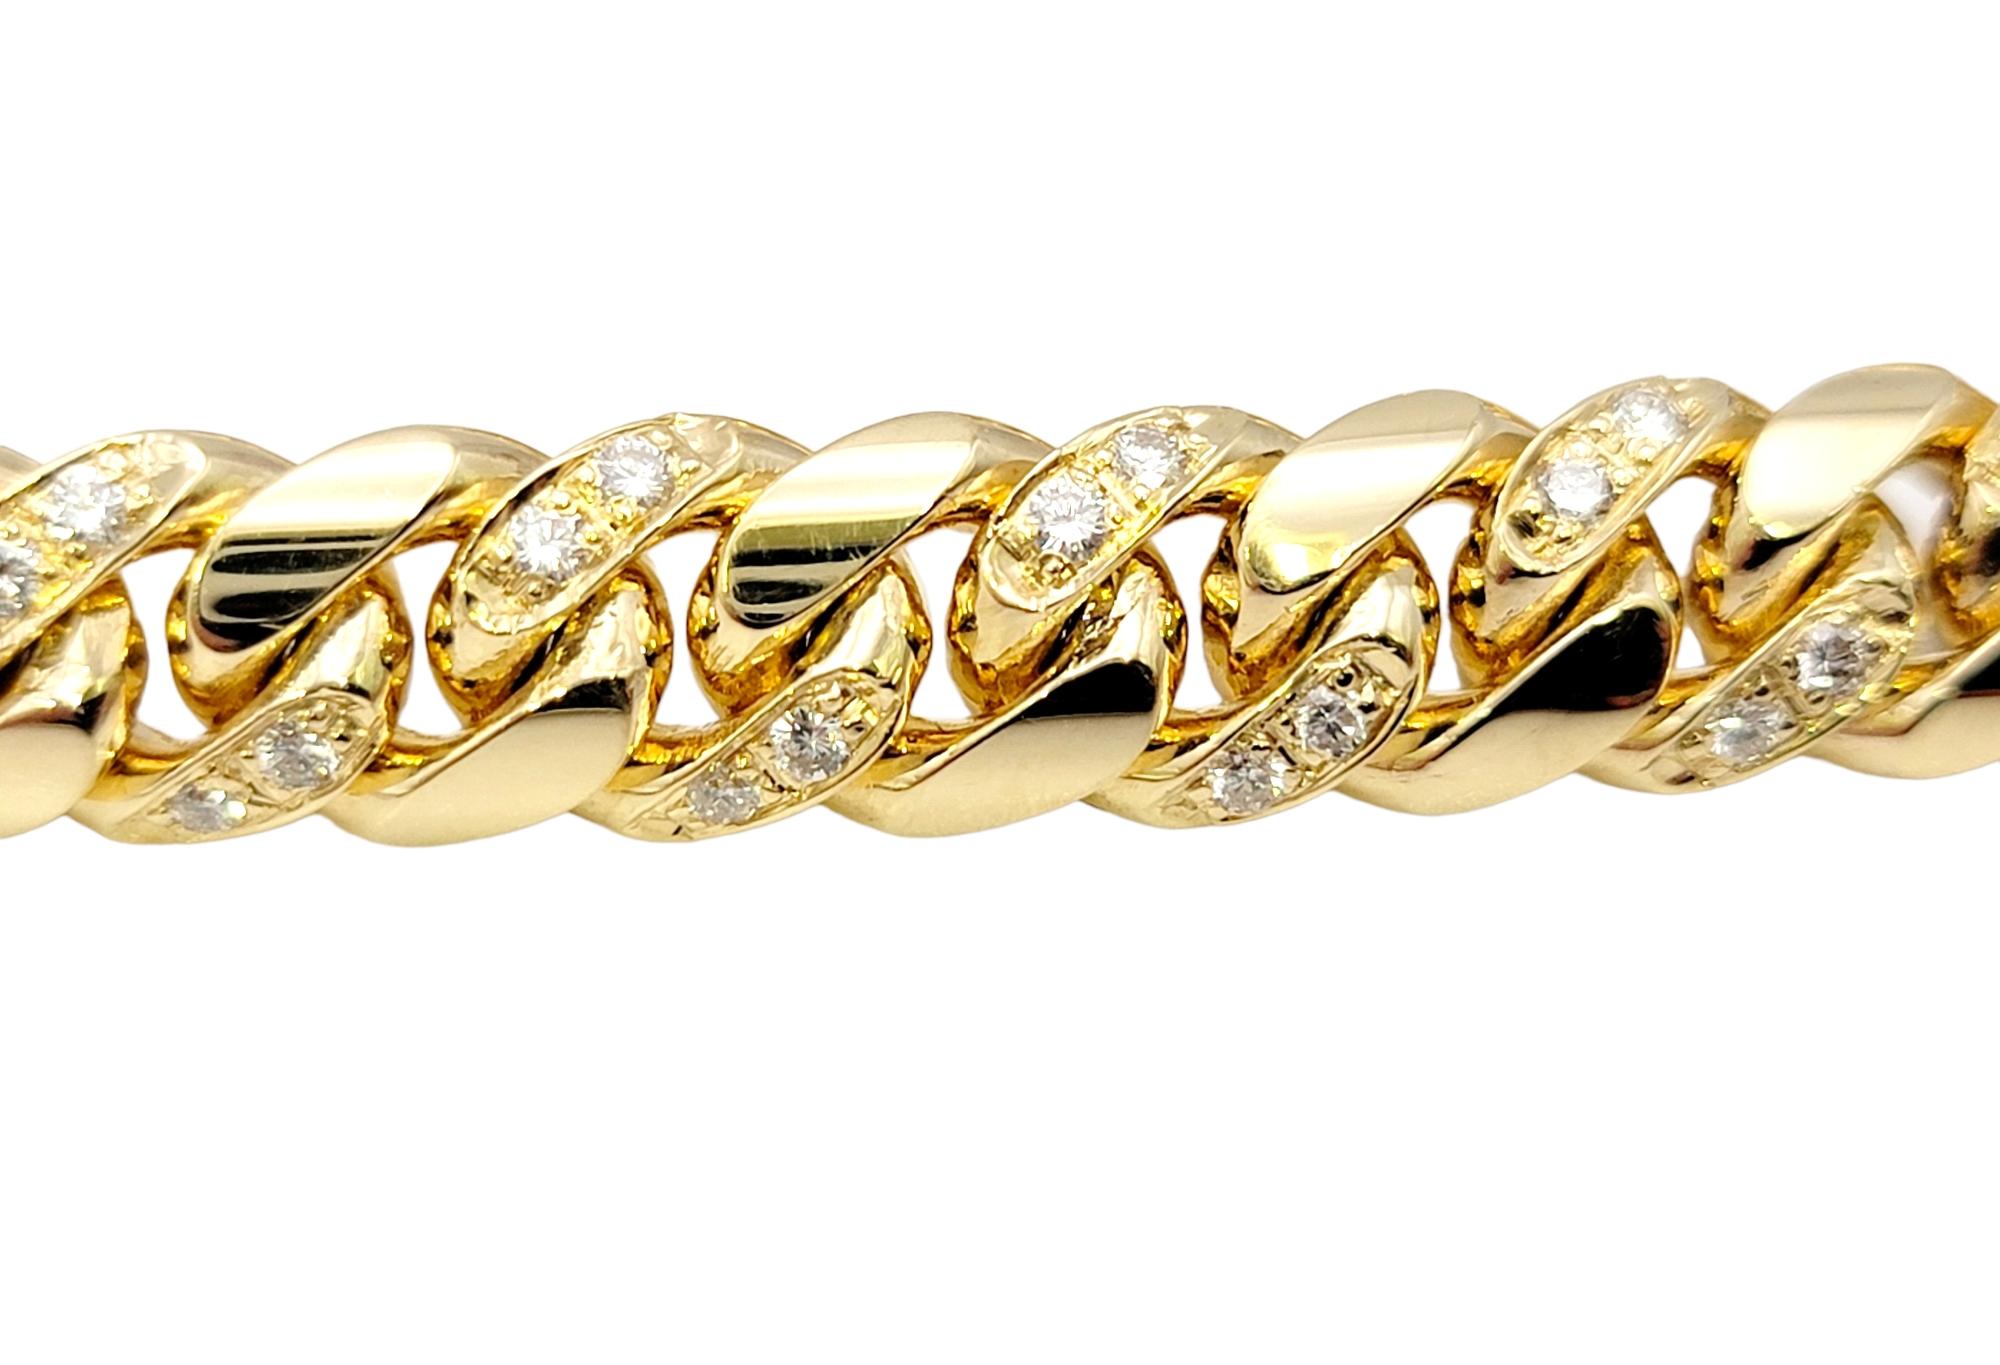 Unisex 14 Karat Yellow Gold Curb Link Bracelet with Pave Diamond Accents In Good Condition For Sale In Scottsdale, AZ